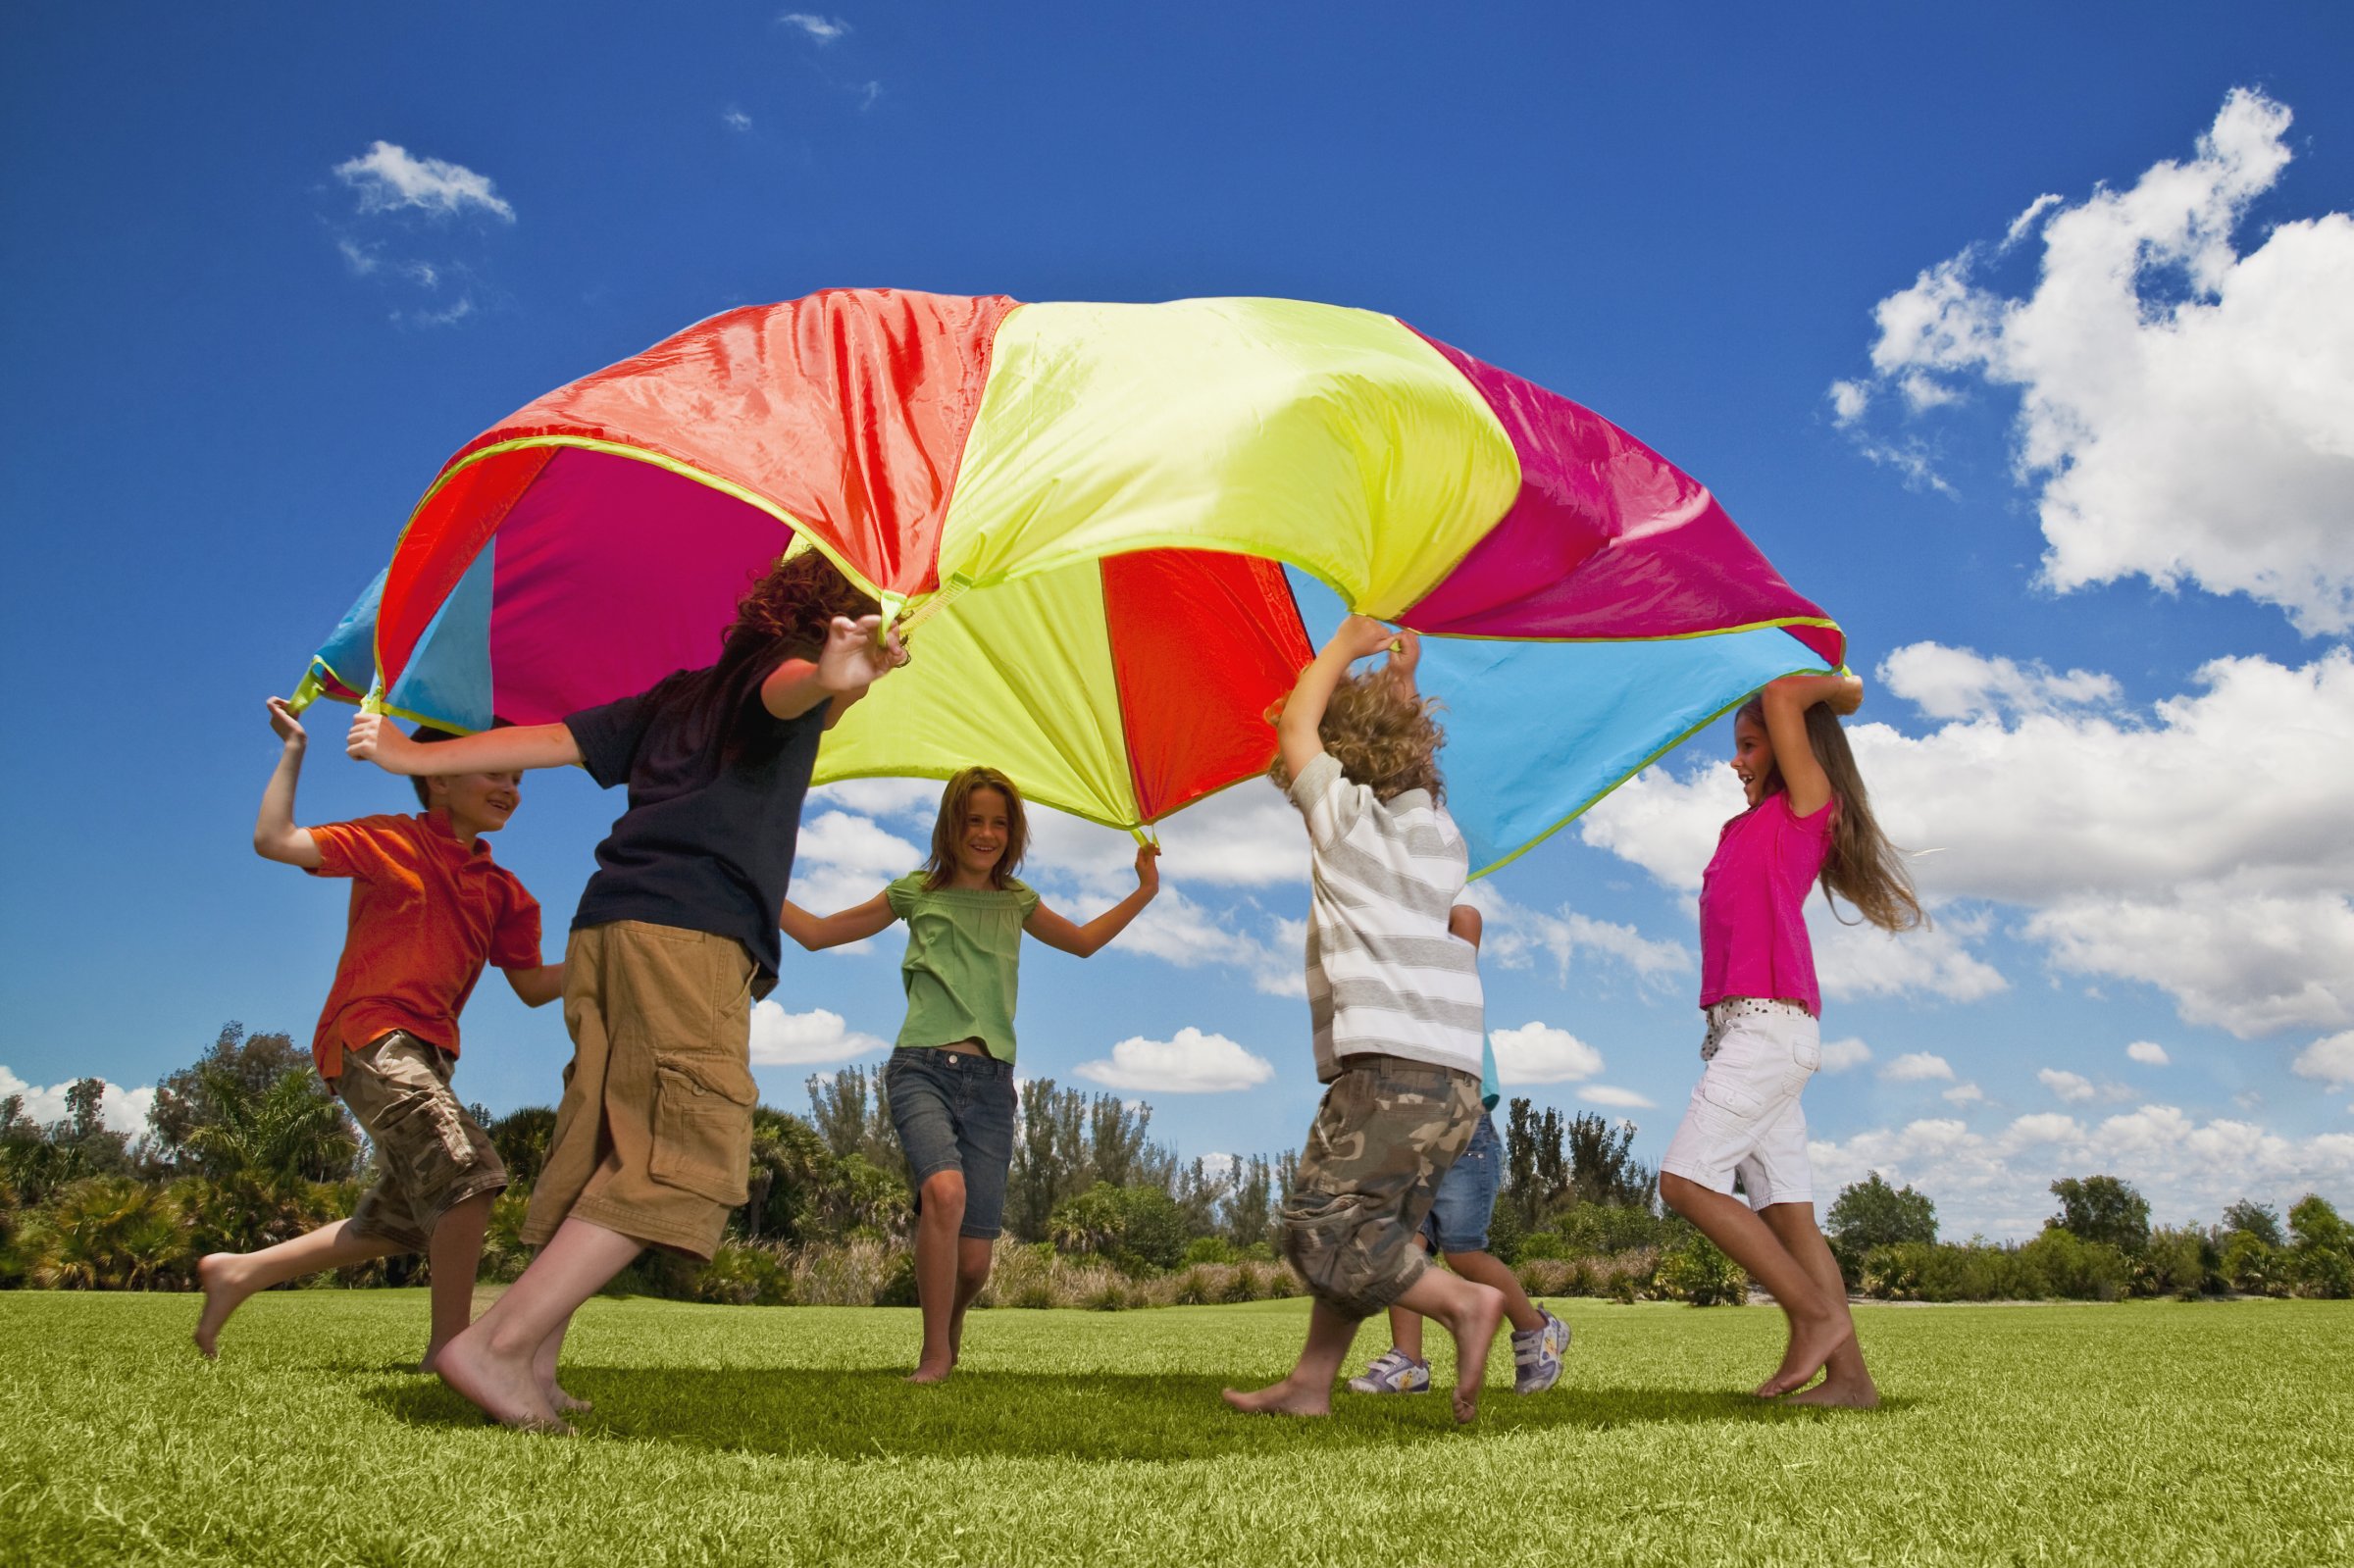 Group of kids playing with a parachute in the park